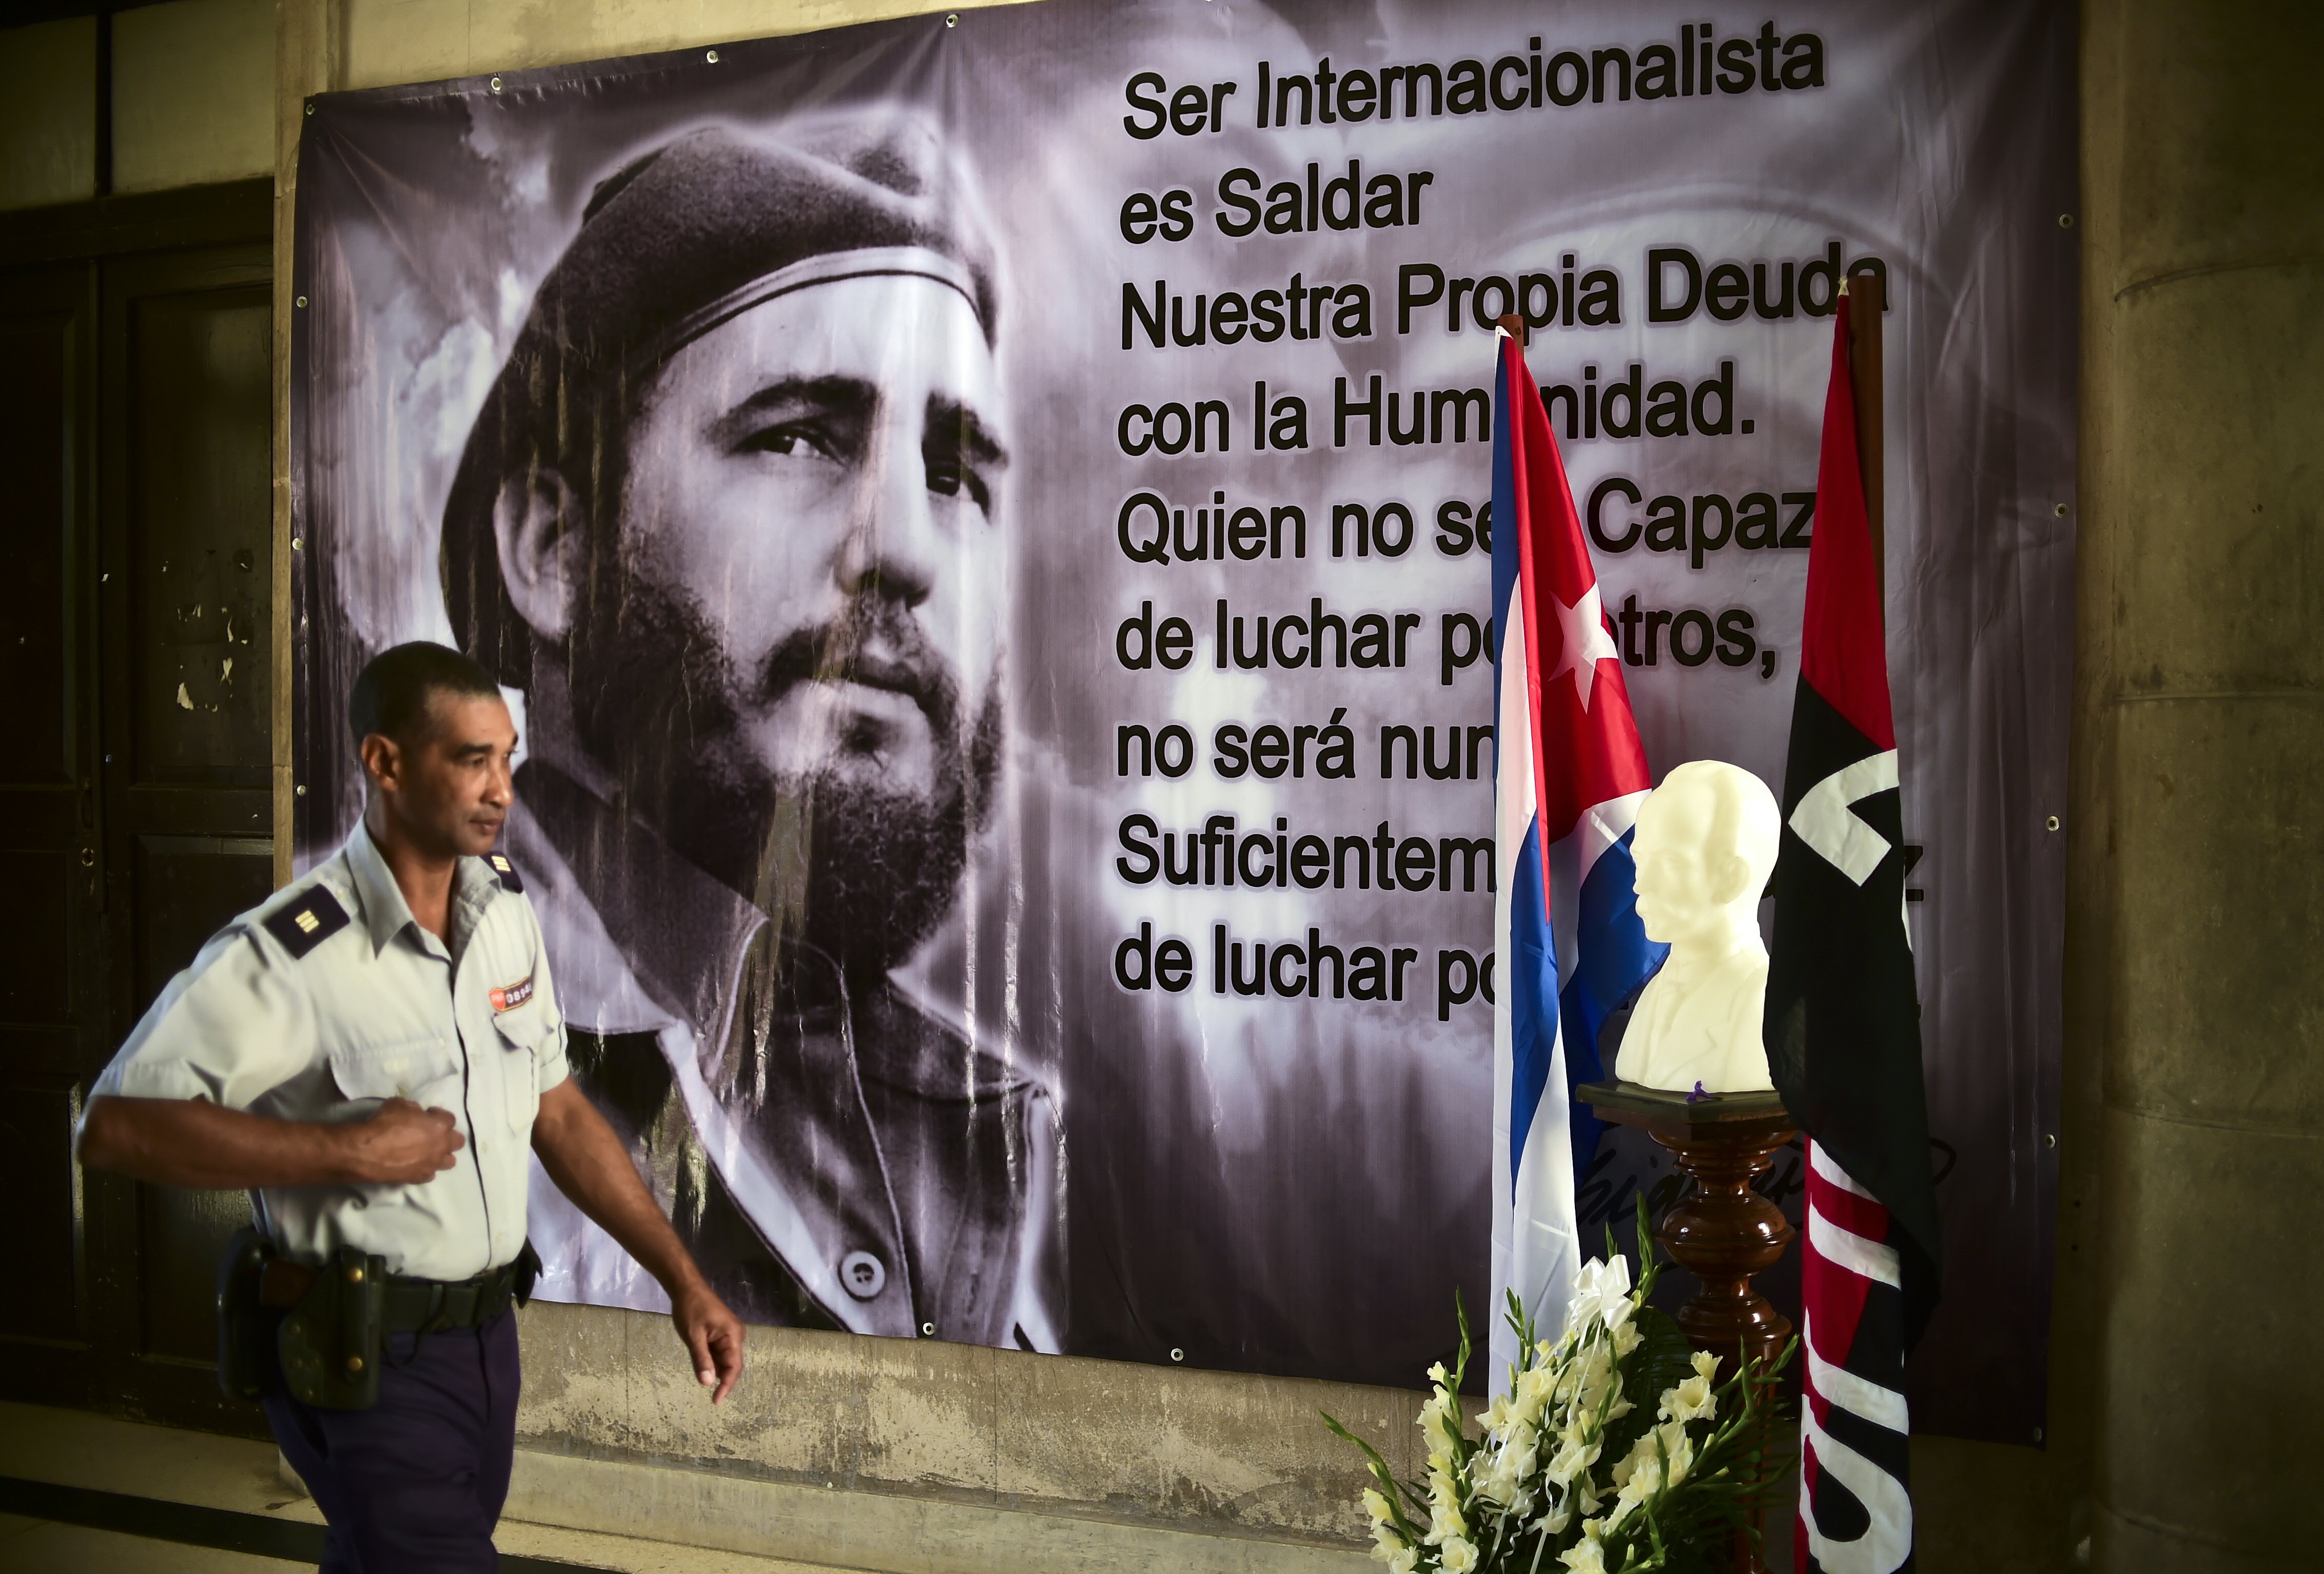 A police officer passes by a large portrait of late Cuban revolutionary leader Fidel Castro at the City Hall of the Guanabacoa municipality in Havana, on November 28, 2016.  Hundreds of thousands of Cubans flocked to Havana's iconic Revolution Square in a tearful and nostalgic tribute to Fidel Castro on Monday, launching a week-long farewell to the divisive Cold War icon. / AFP PHOTO / RONALDO SCHEMIDT